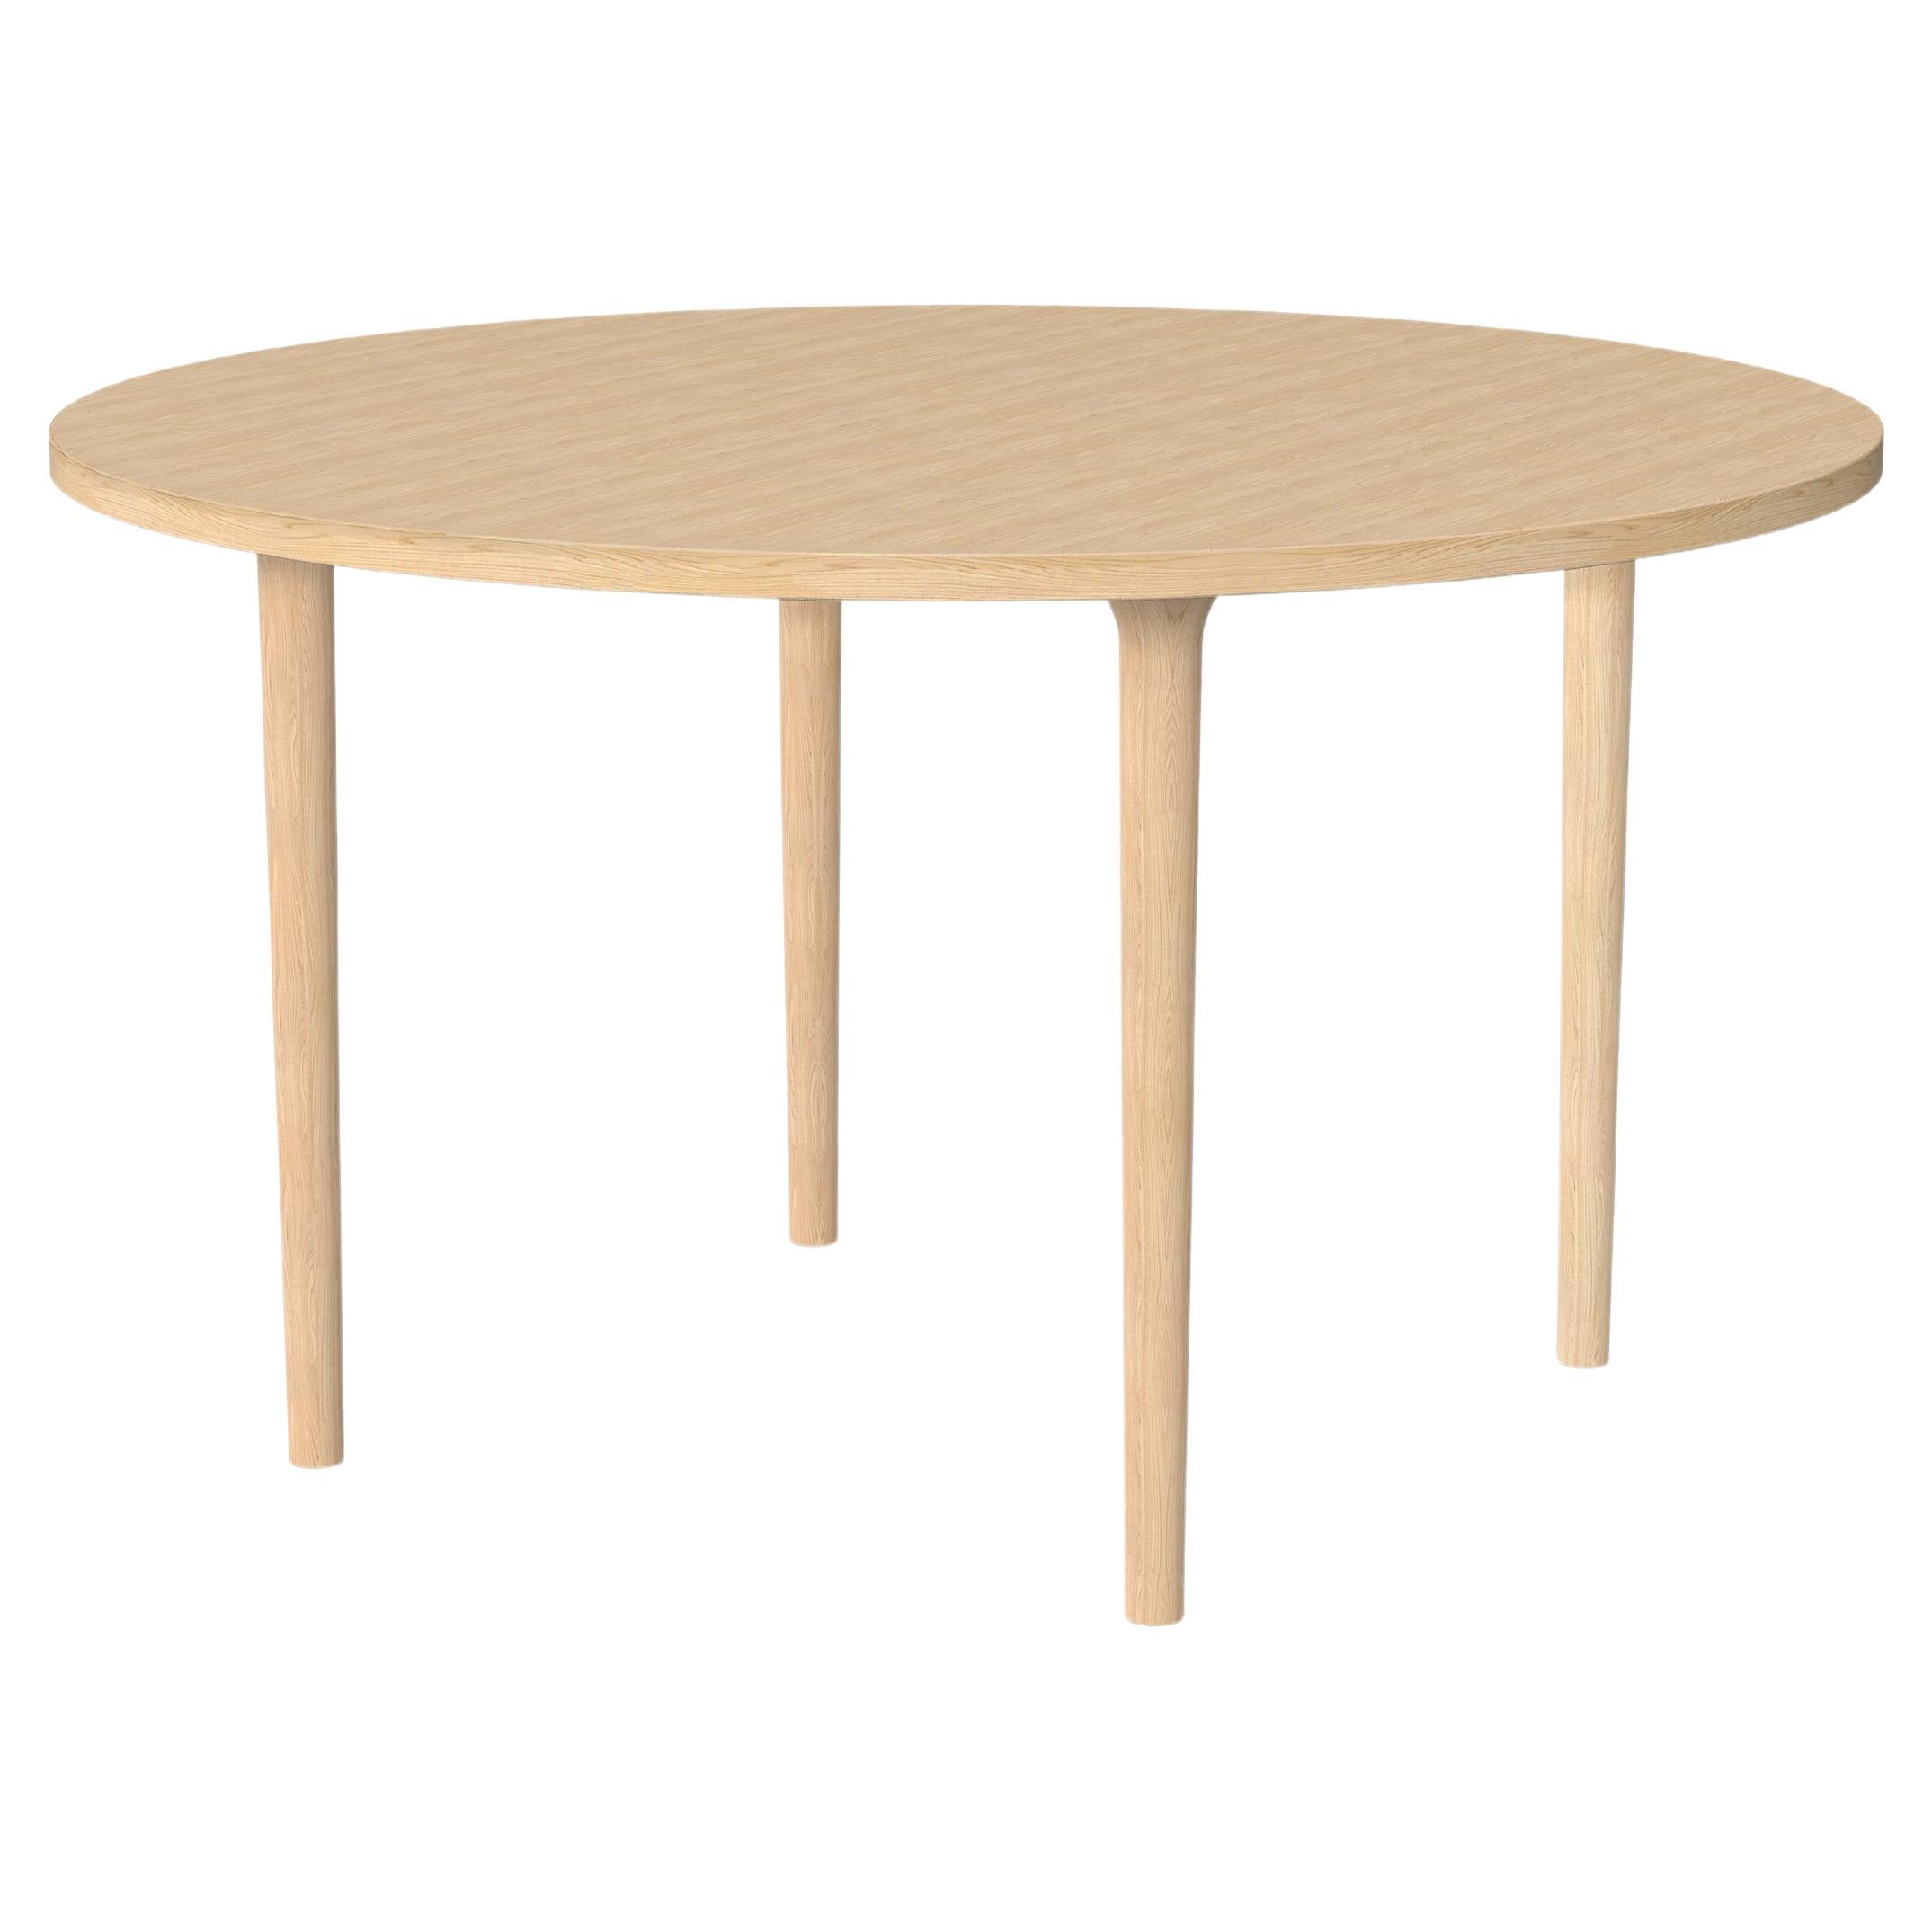 Minimalist Modern Table in Ash Wood Round Ø130cm For Sale